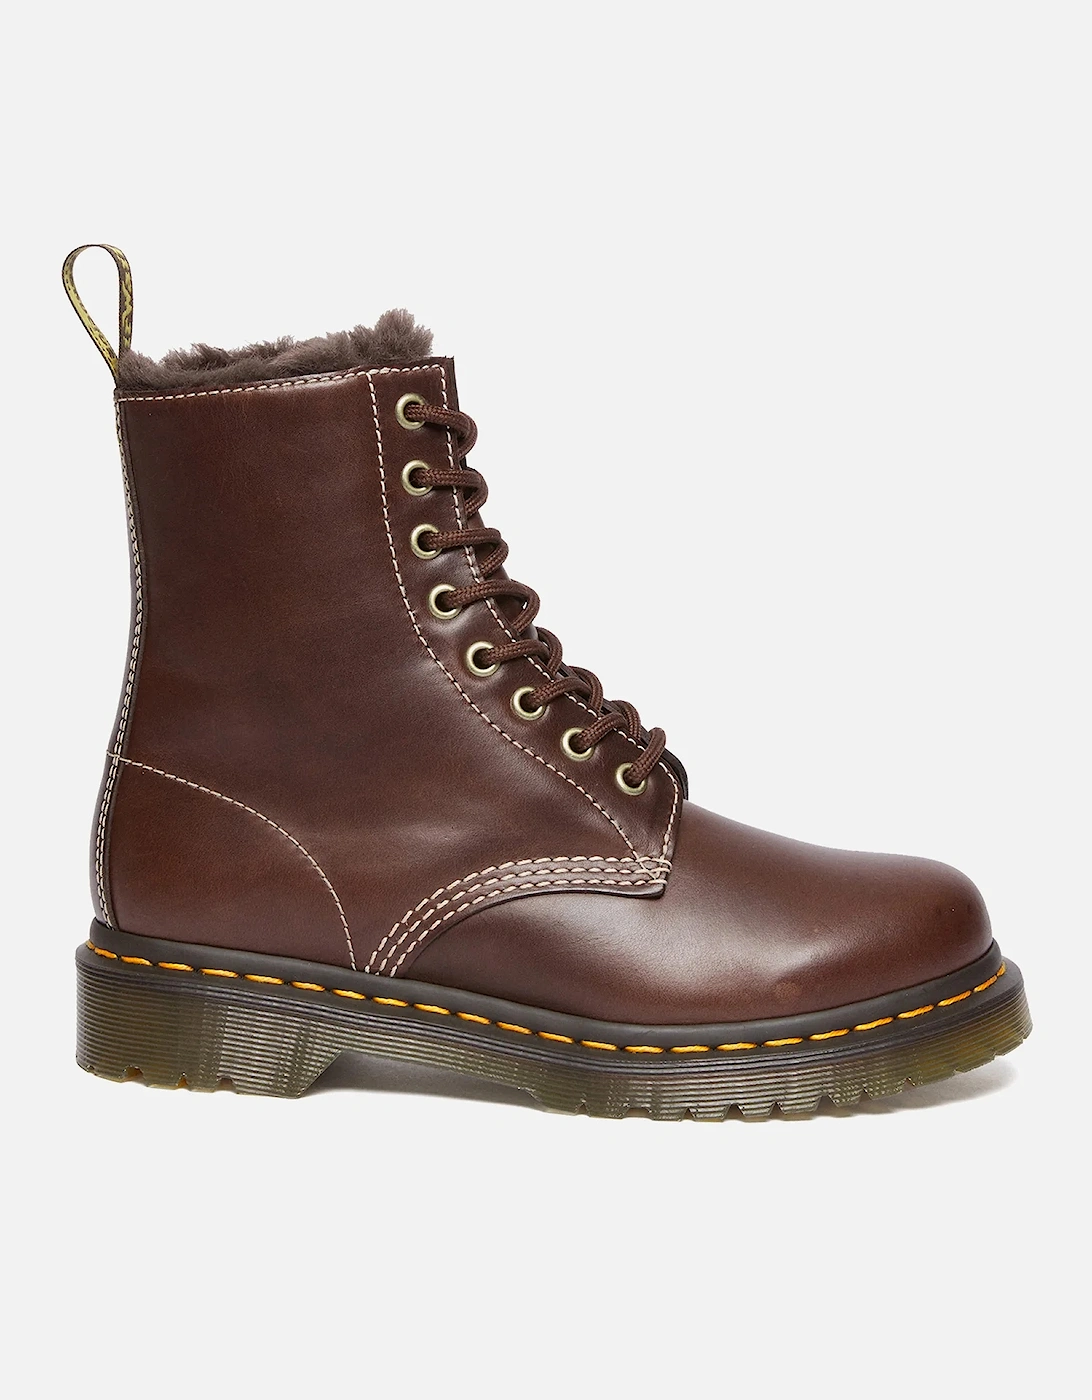 Dr. Martens Women's 1460 Serena Leather 8-Eye Boots - Dr. Martens - Home - Dr. Martens Women's 1460 Serena Leather 8-Eye Boots, 2 of 1